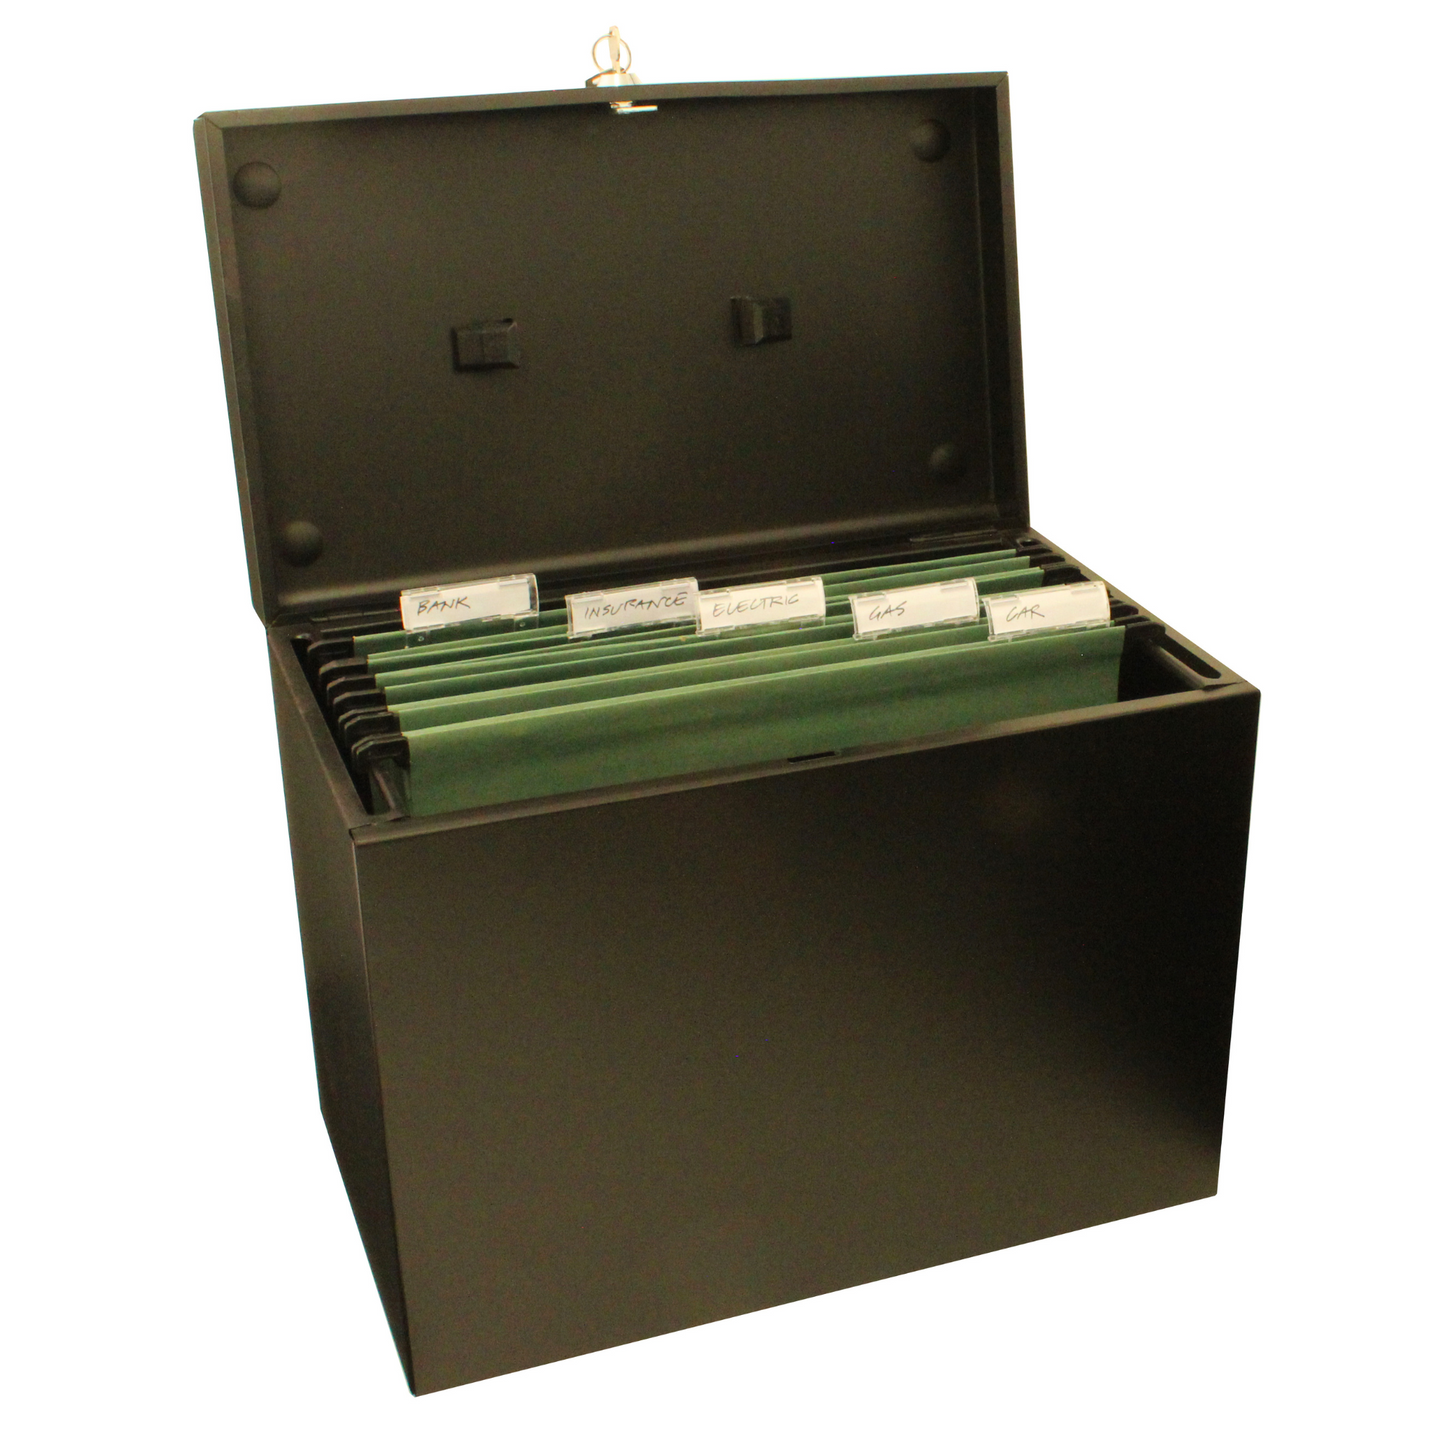 A4 Metal Home File Box with 5 Suspension Files